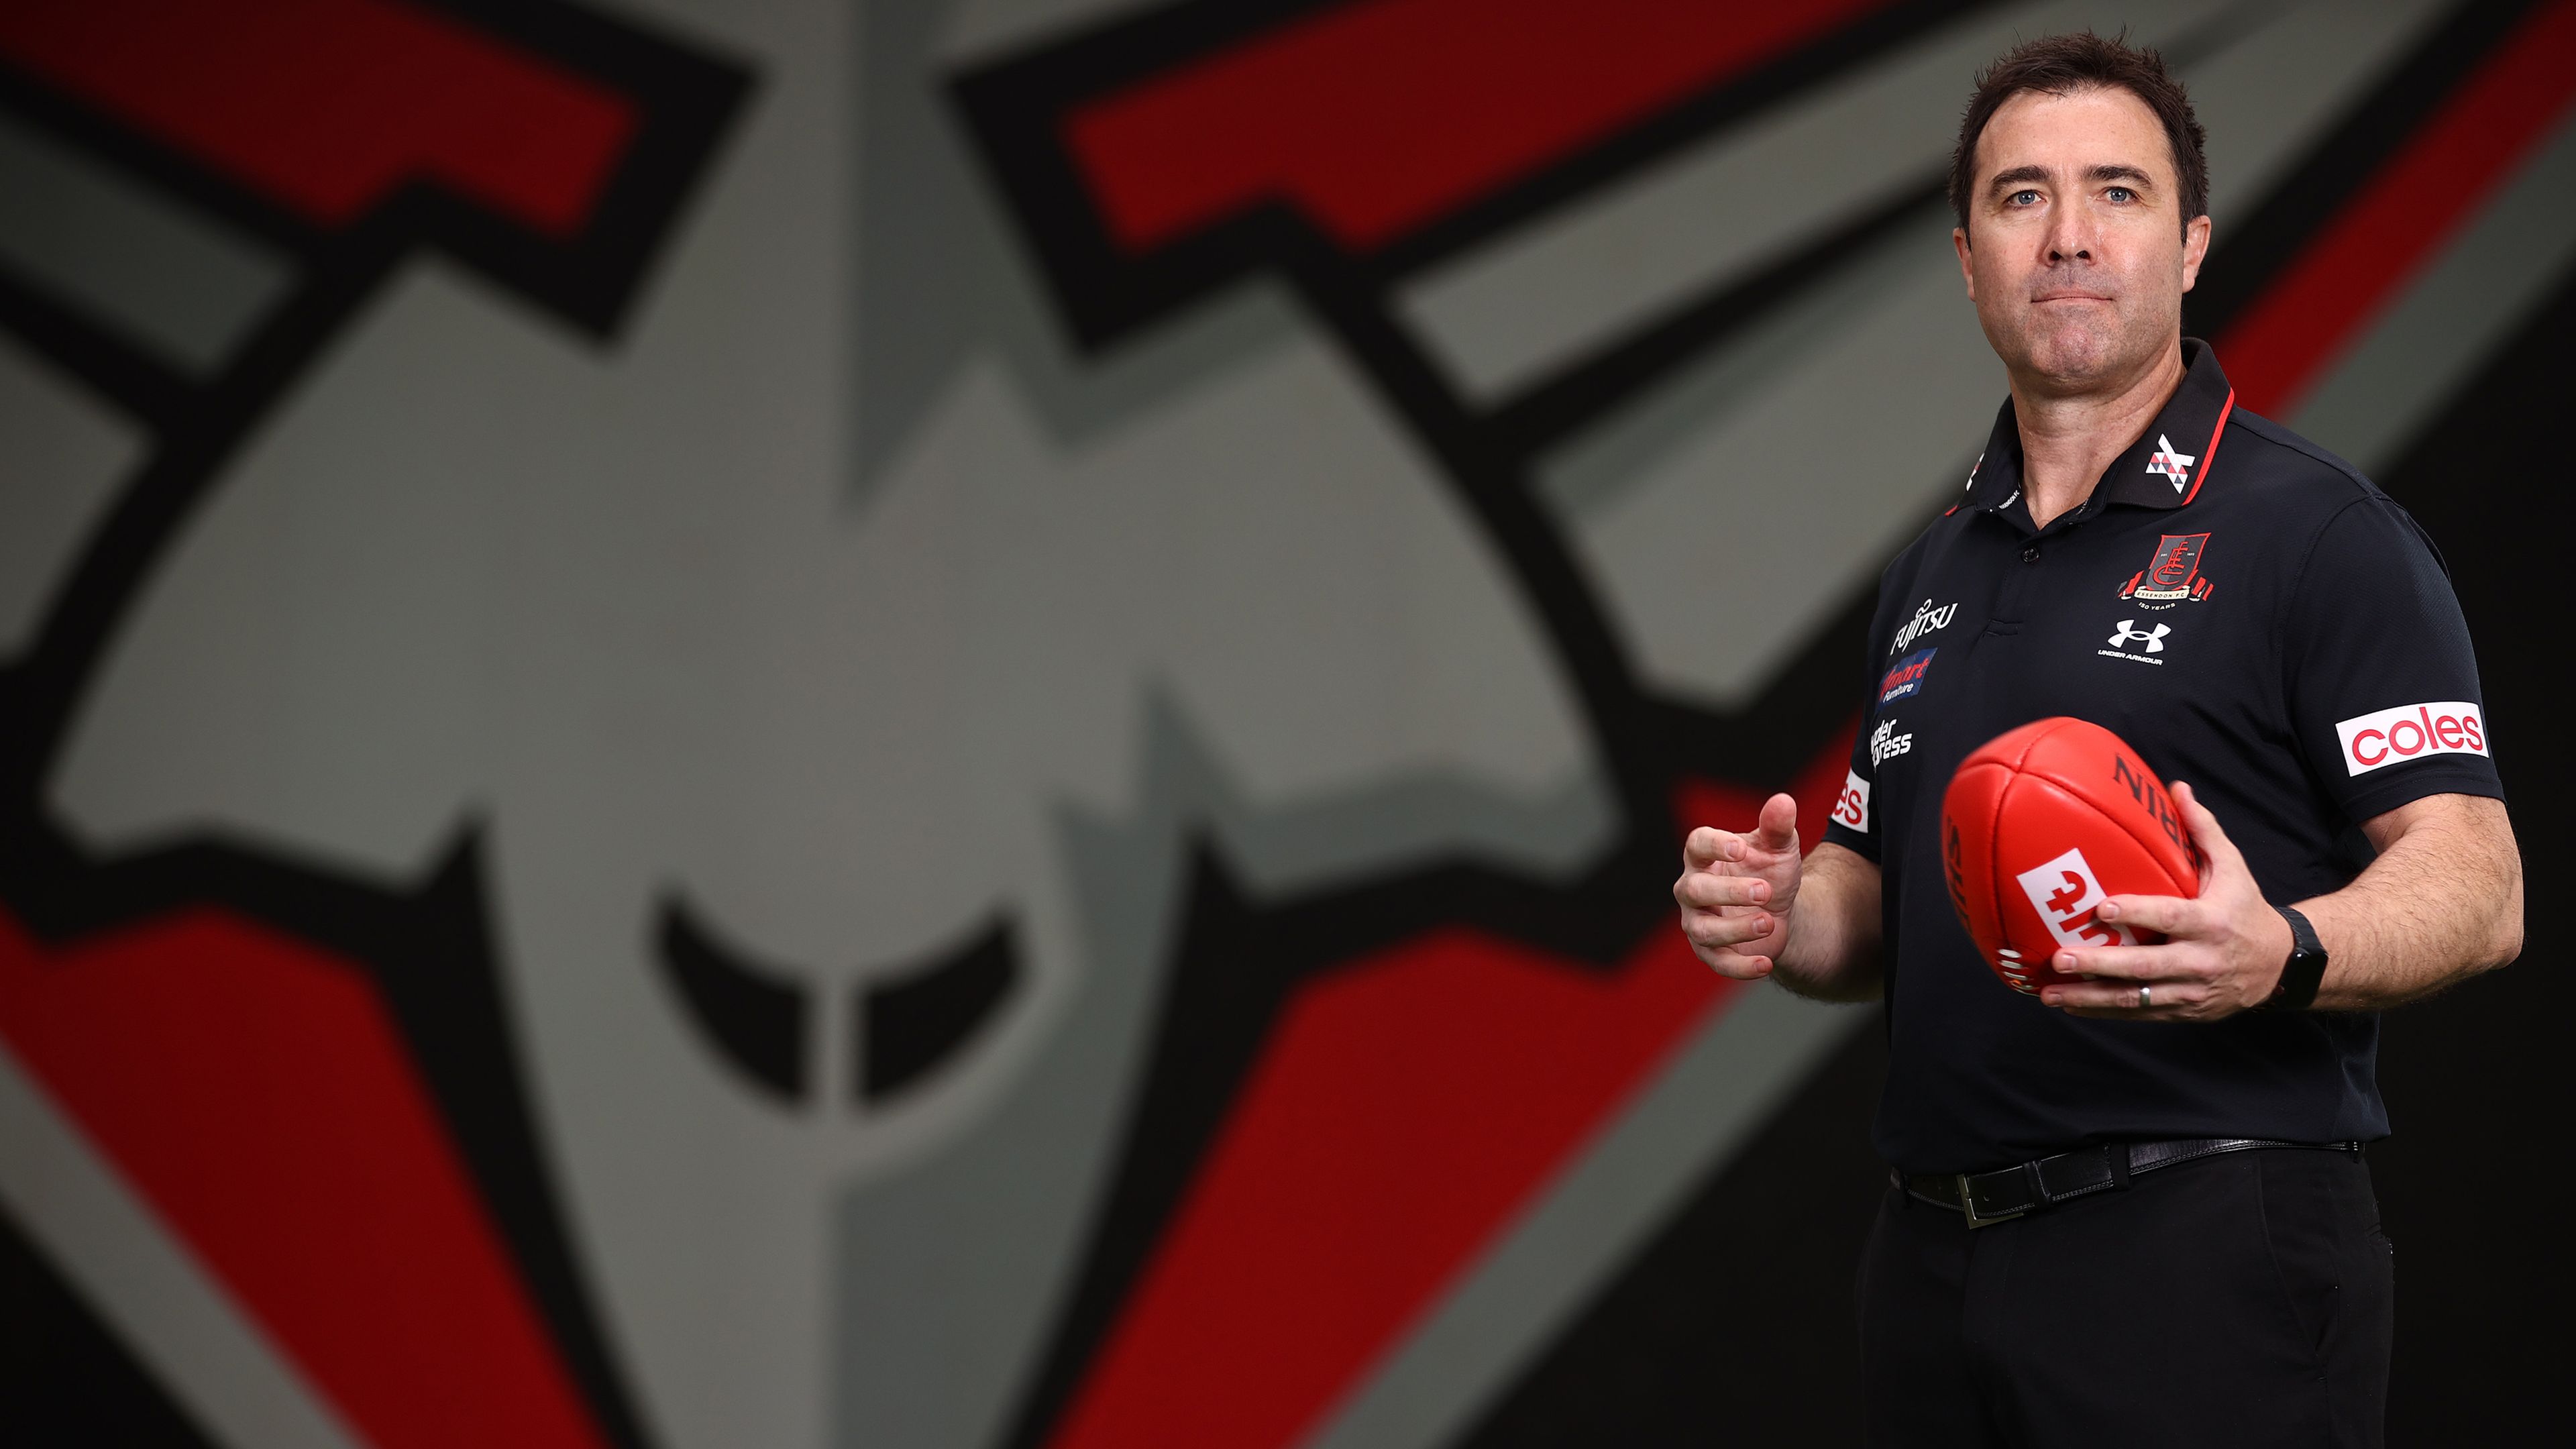 The factor that convinced Brad Scott to take a punt on Essendon after shambolic 2022